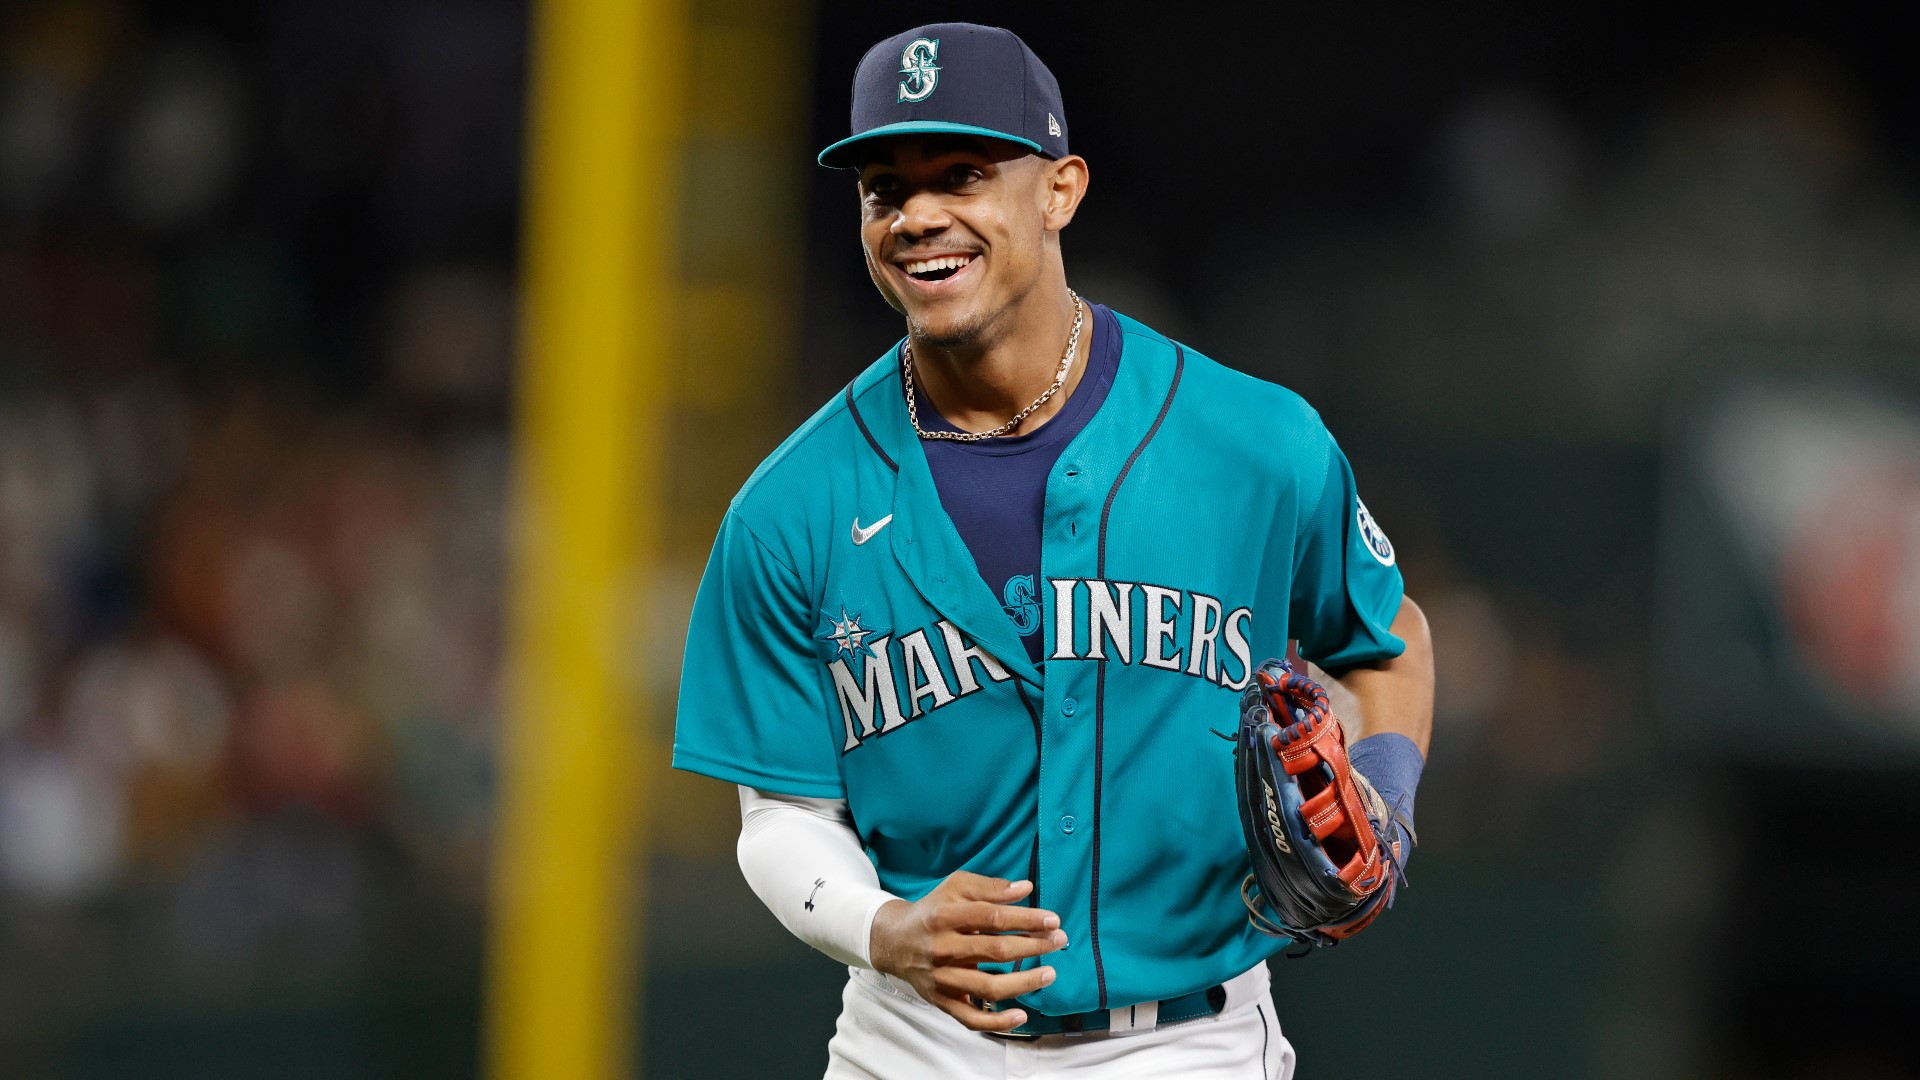 Seattle Mariners vs. Toronto Blue Jays Wild Card series preview